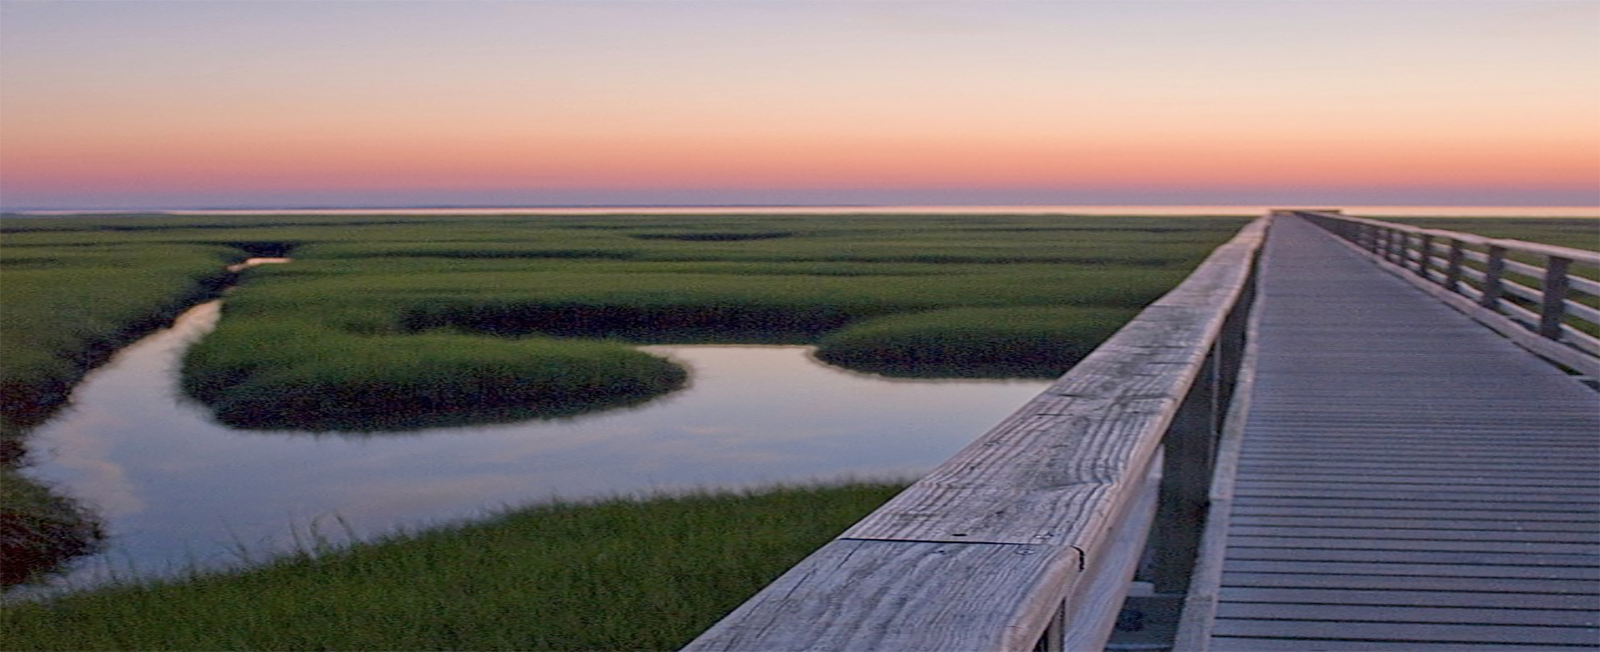 Looking to get an amazing picture on the Cape and Islands? Check out these ten photo worthy locations.